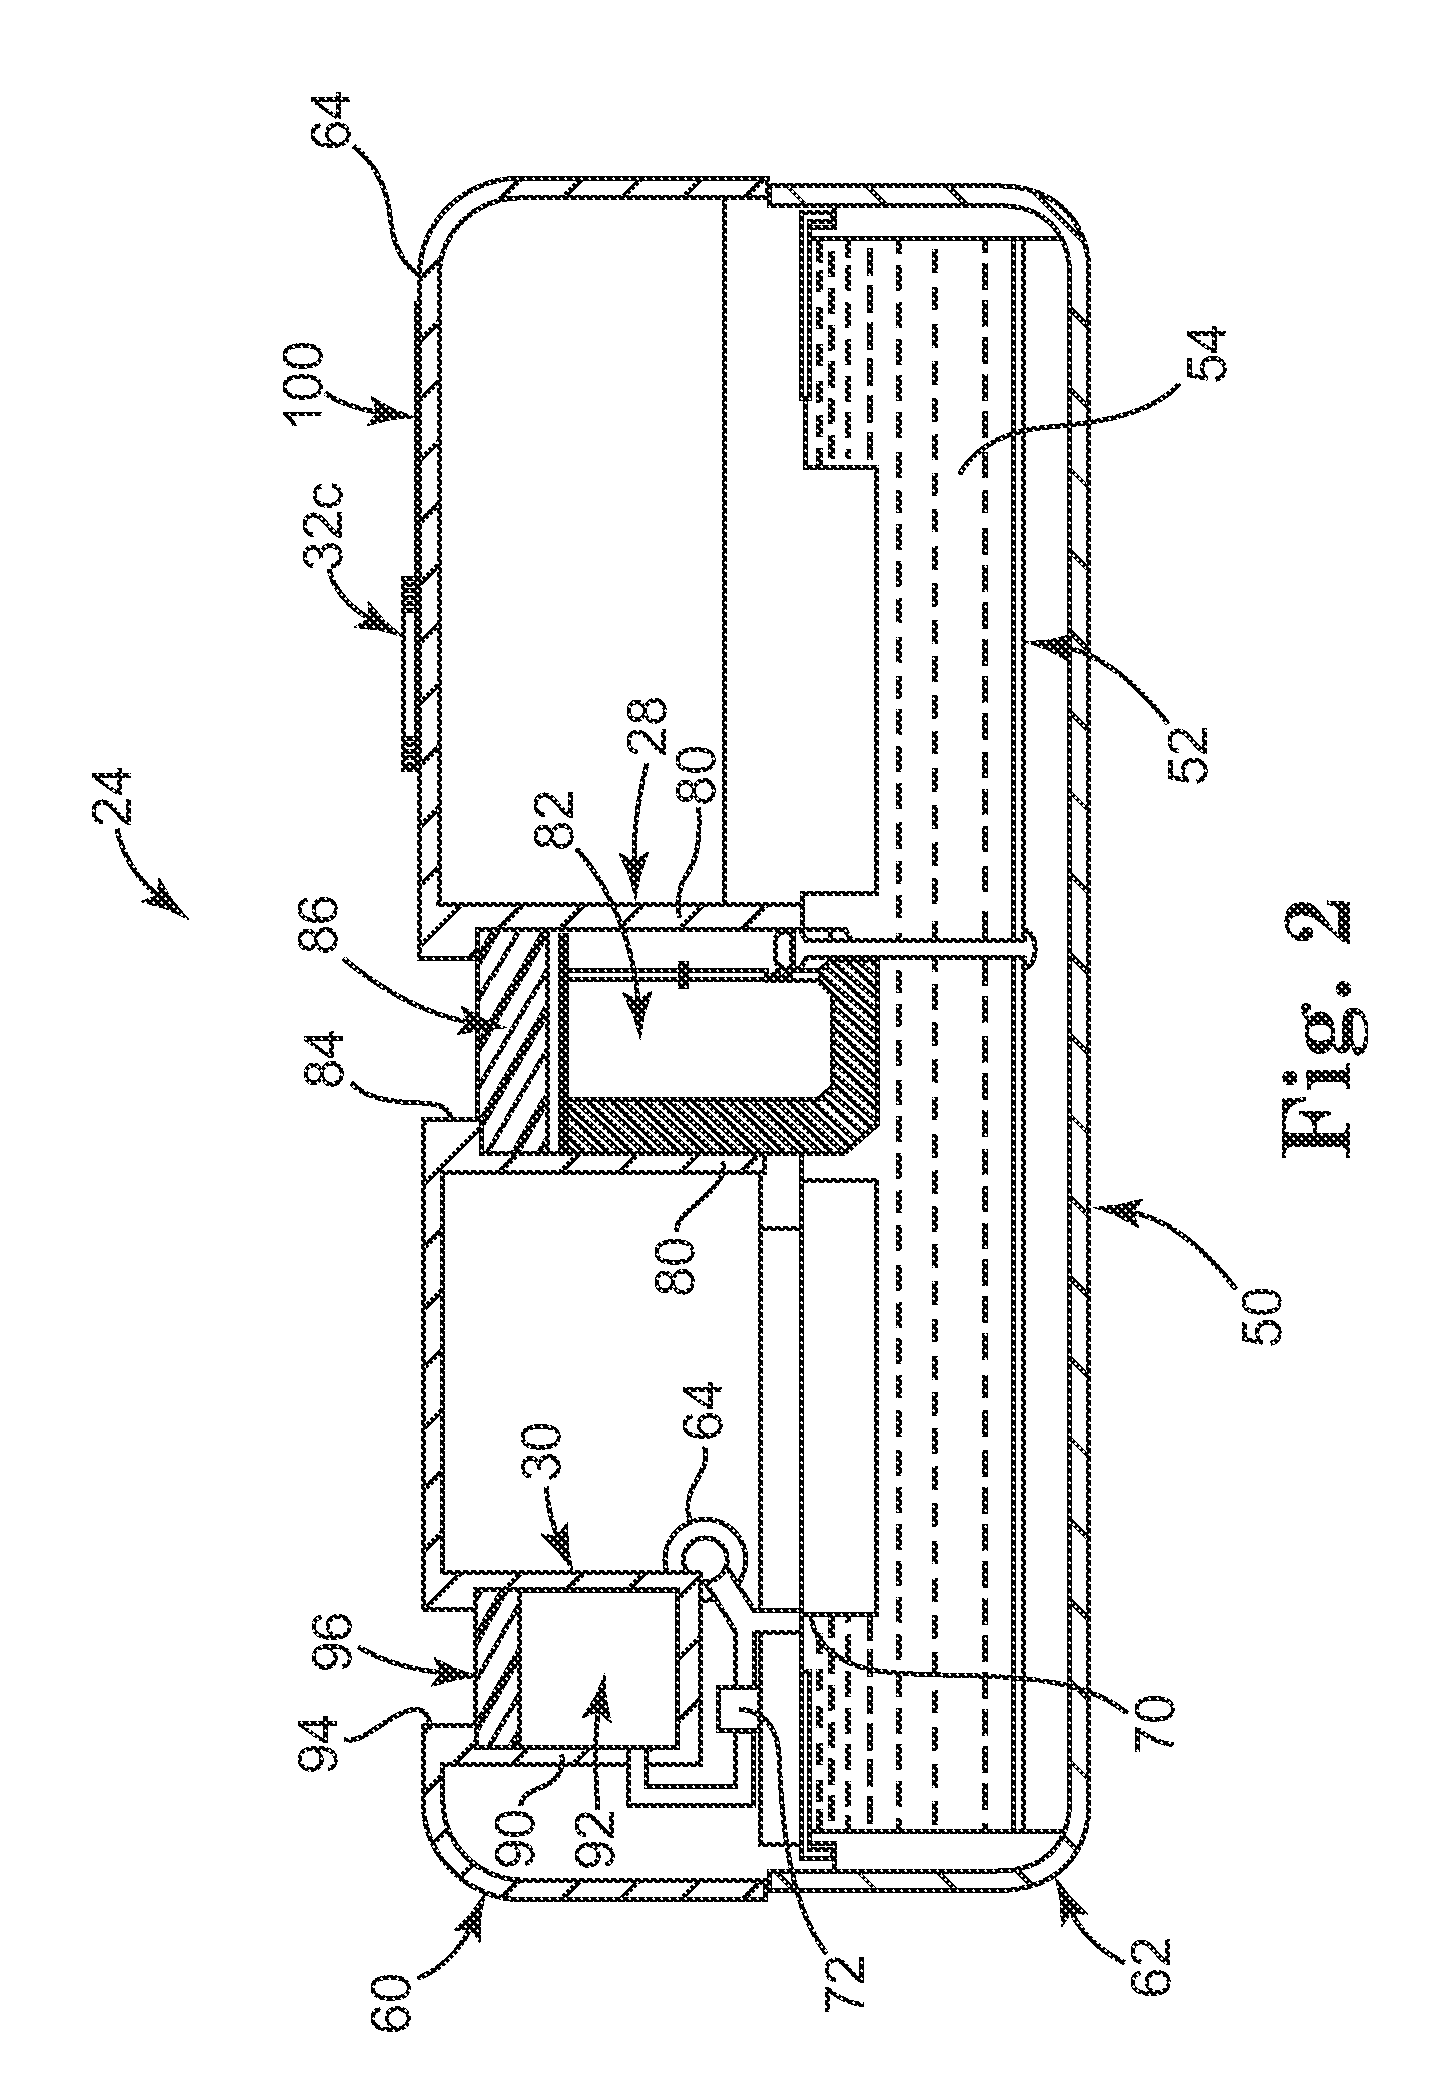 Septum port locator system and method for an implantable therapeutic substance delivery device